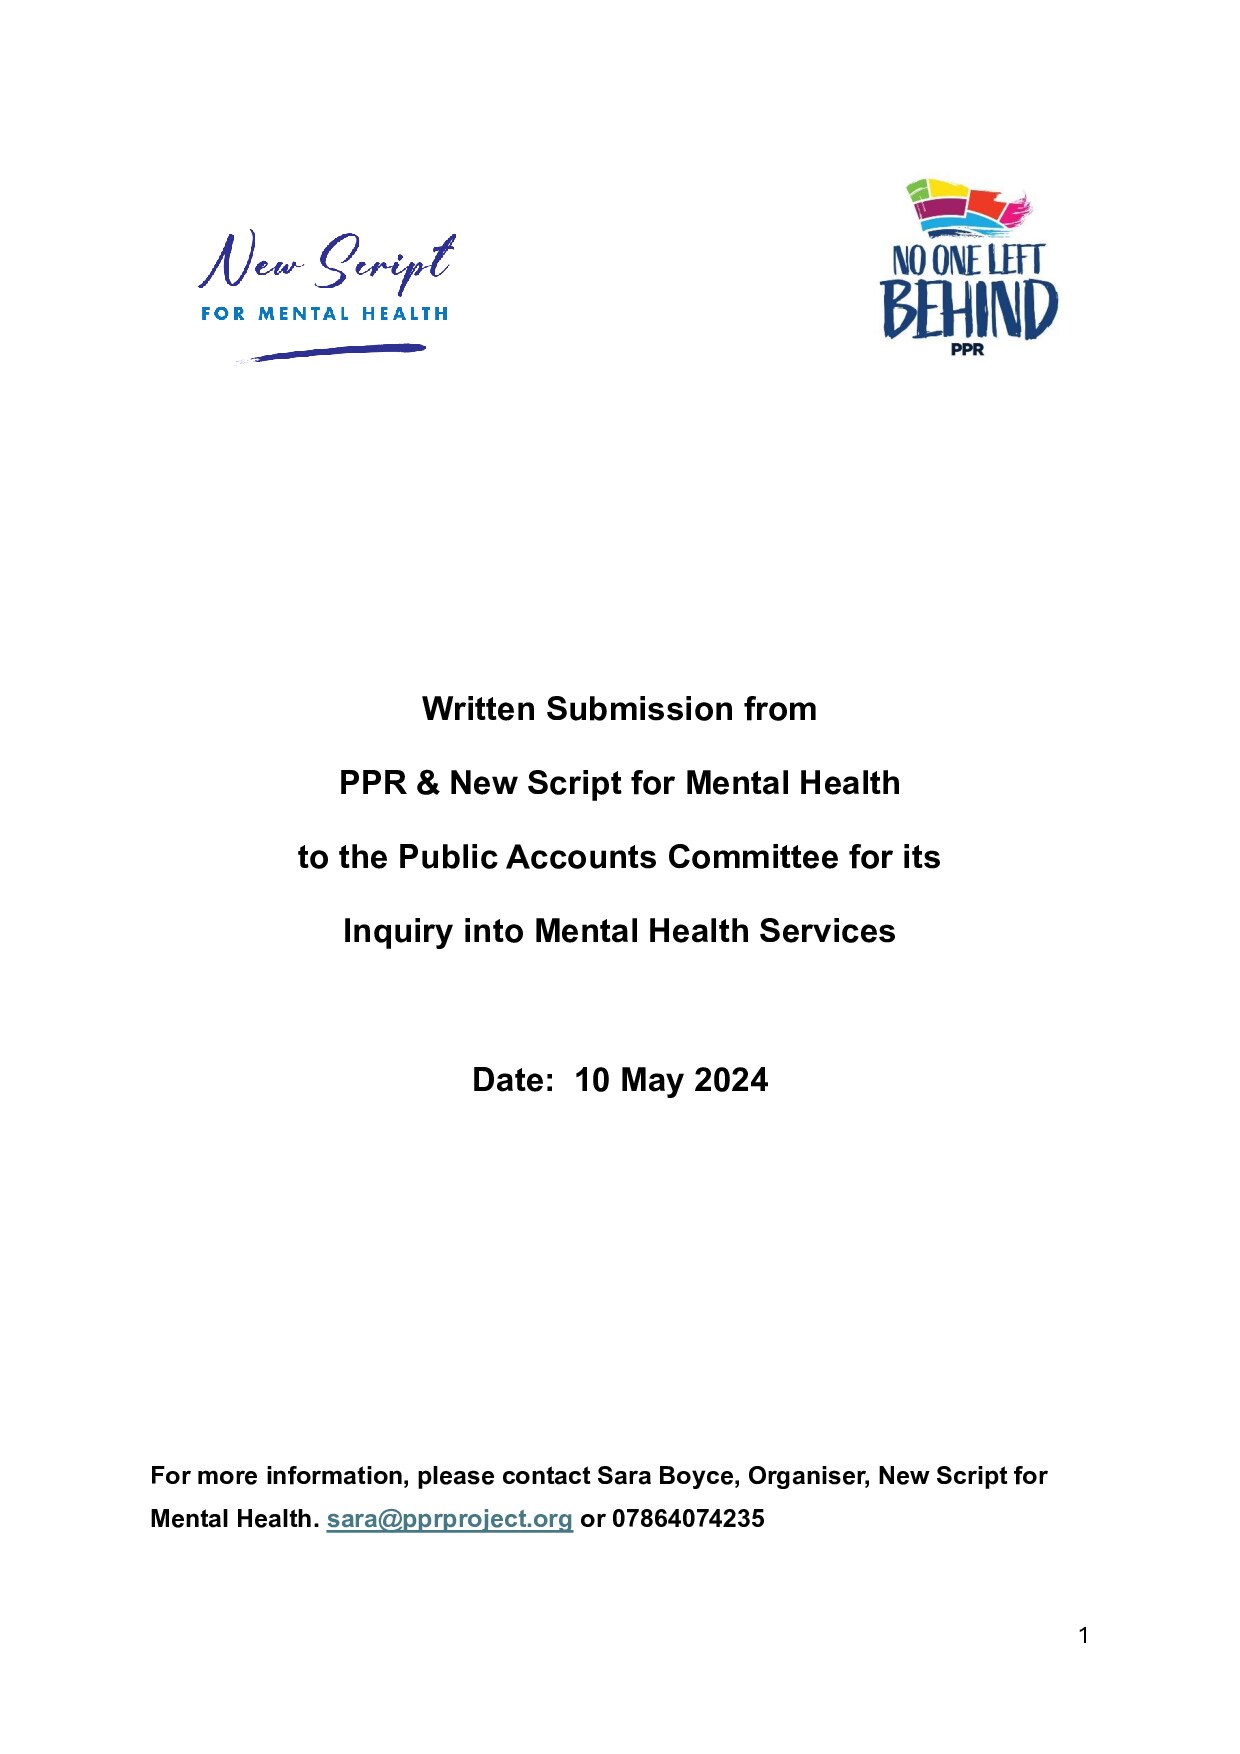 Written Submission from PPR & New Script for Mental Health to the Public Accounts Committee for its Inquiry into Mental Health Services